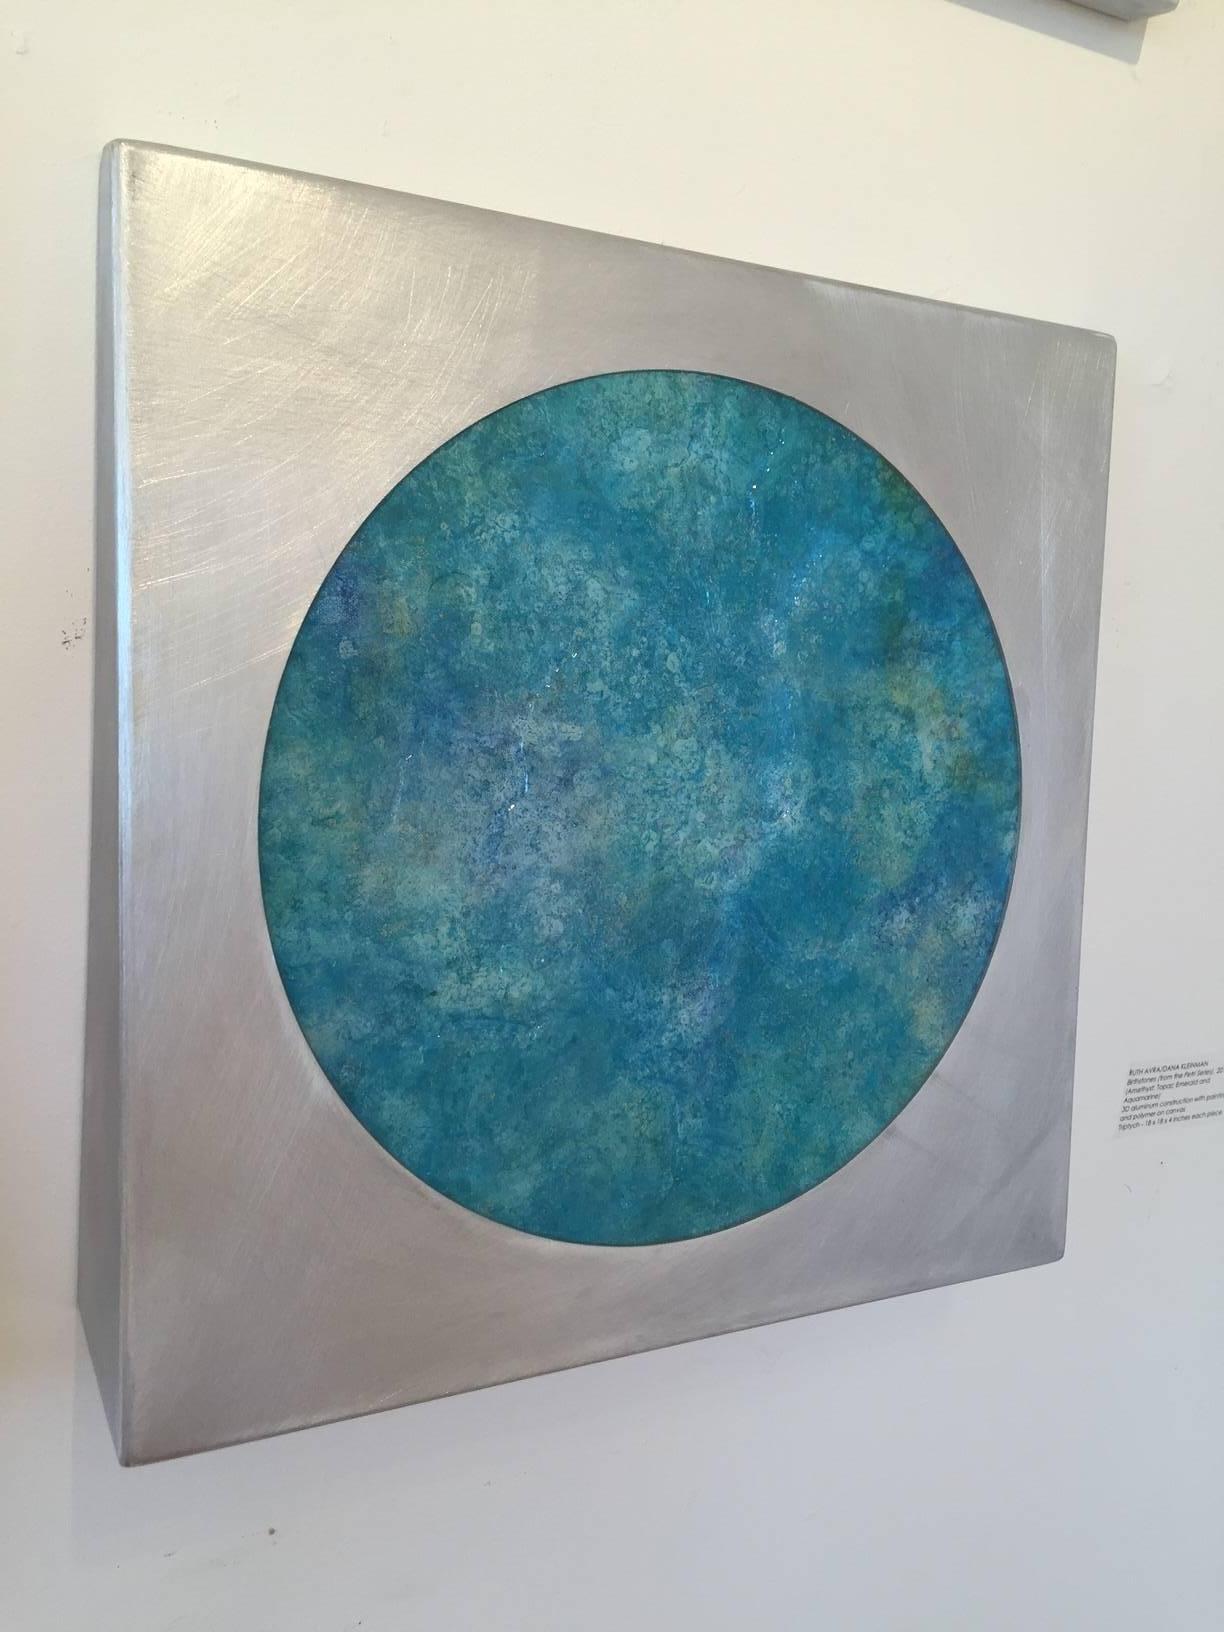 Birthstones (from the Petri Series) - Gray Abstract Painting by KX2: Ruth Avra + Dana Kleinman